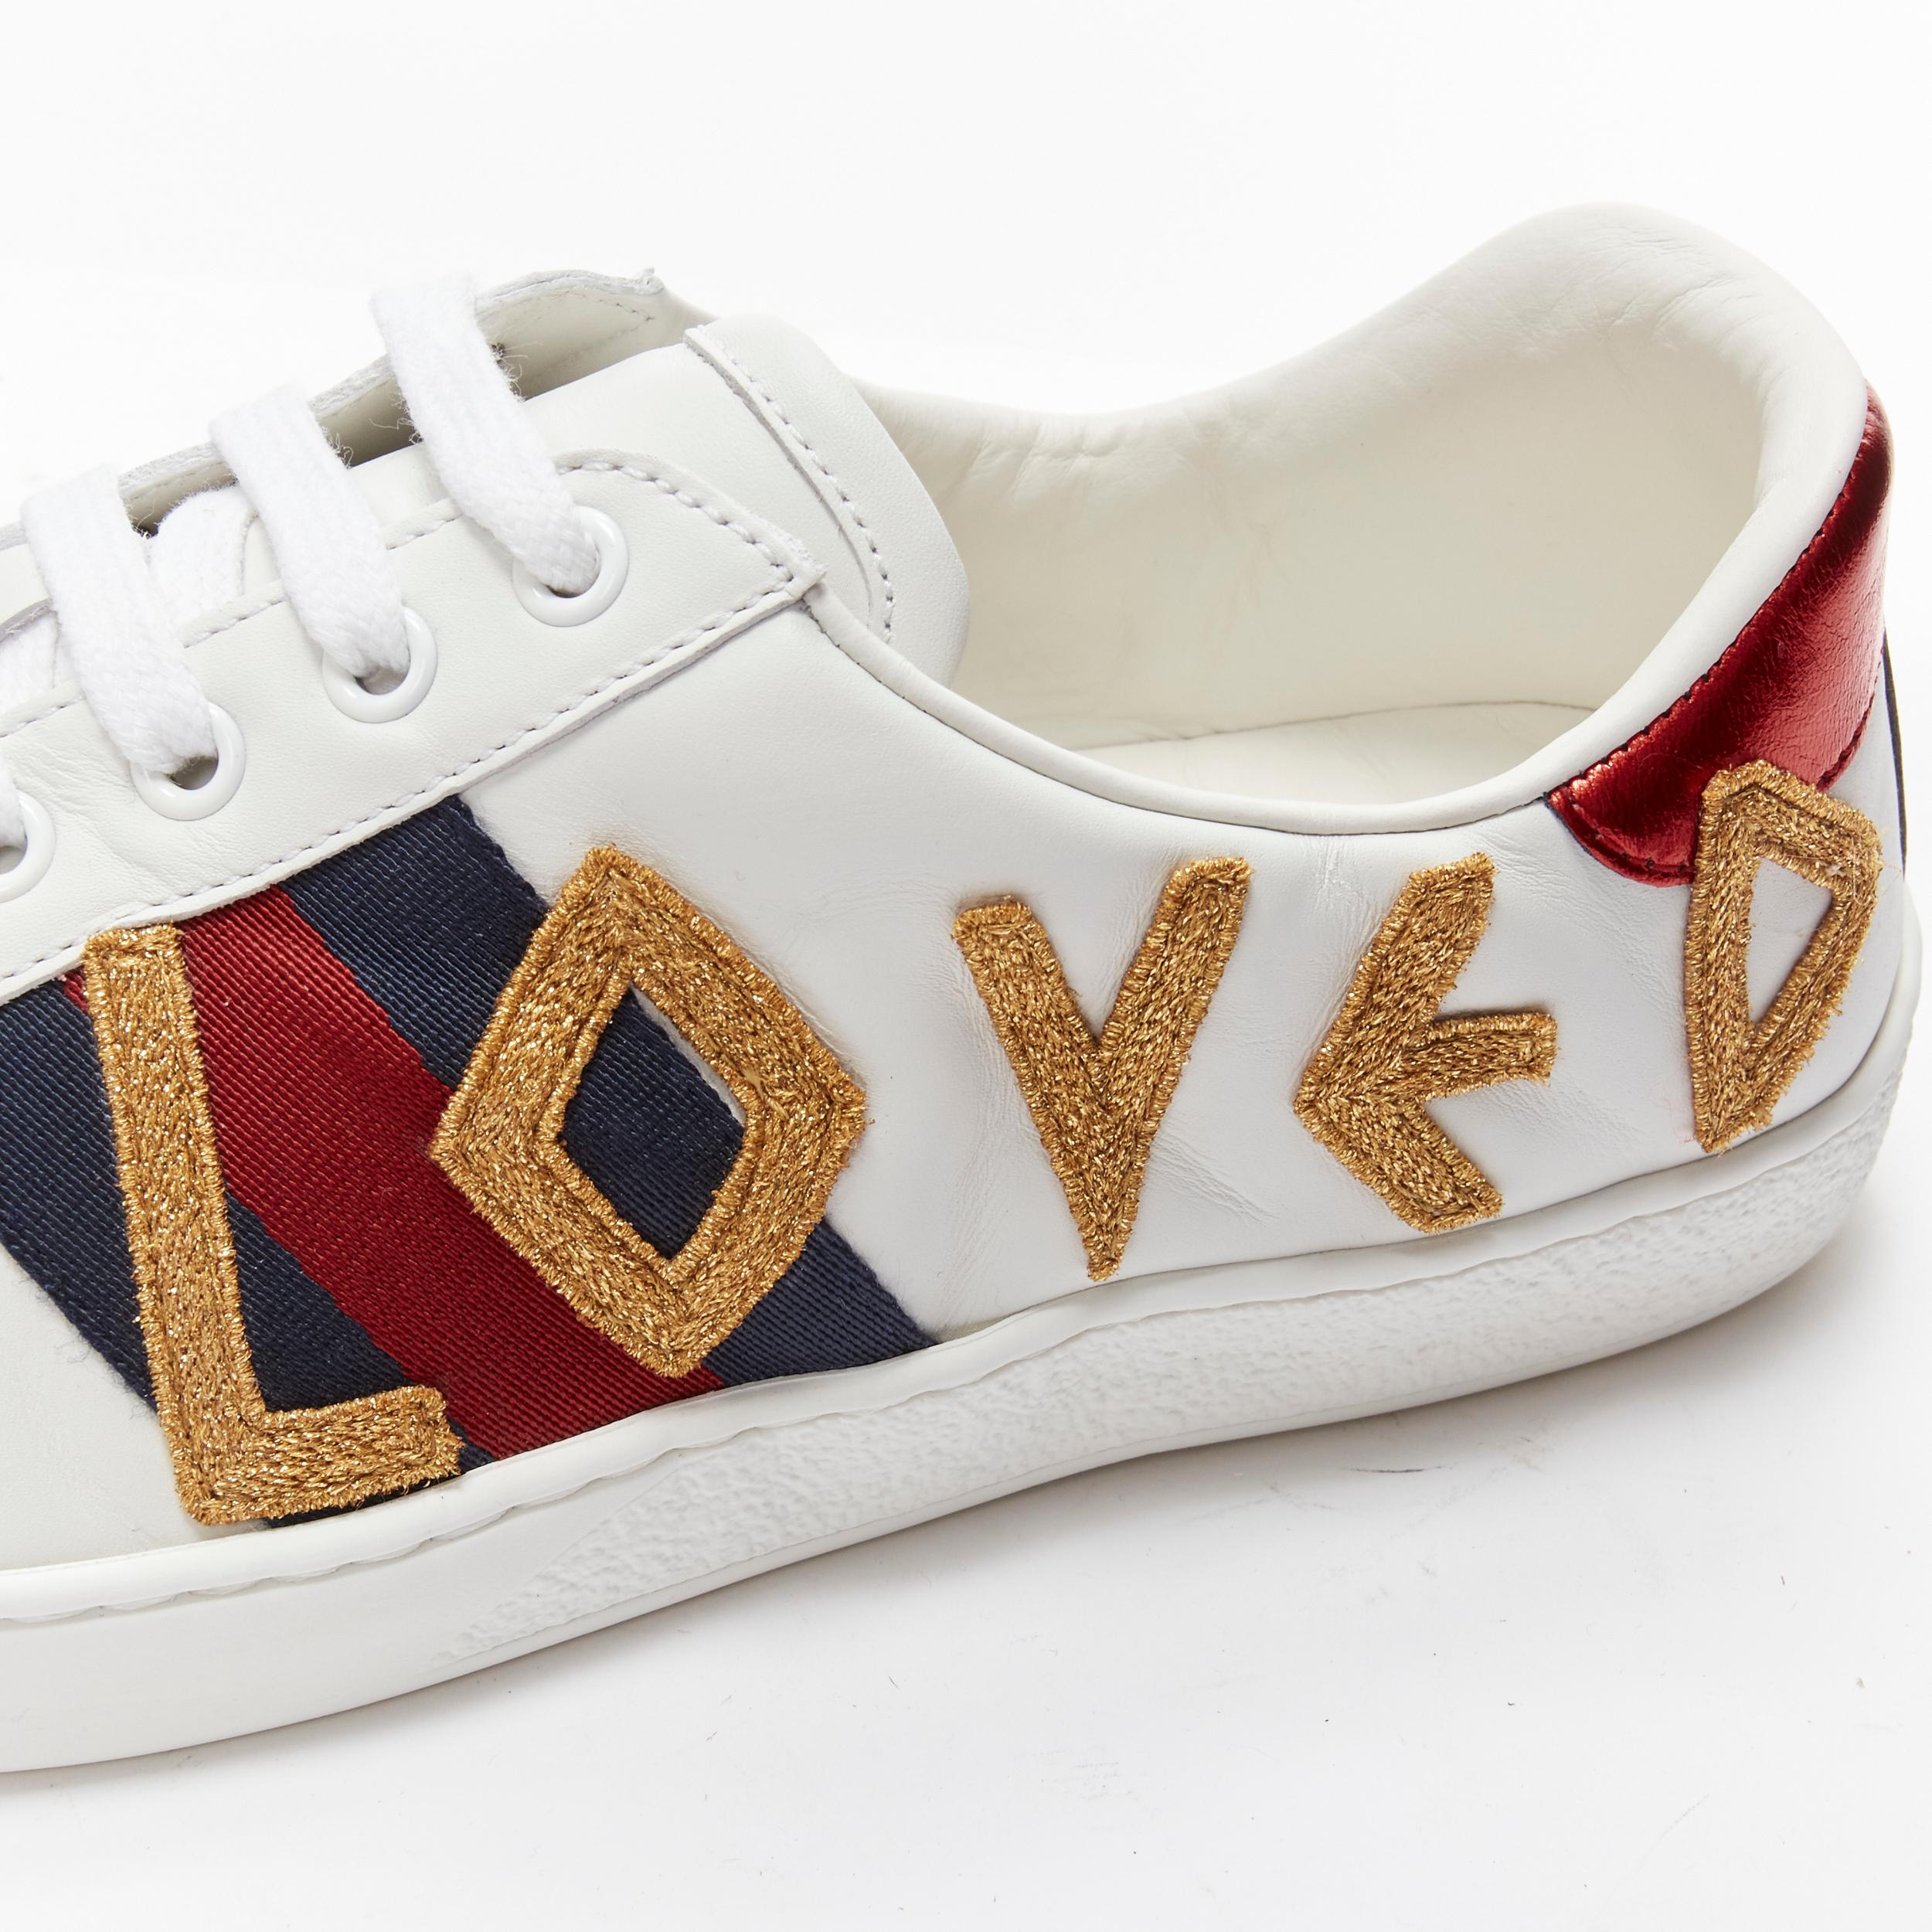 GUCCI Ace Loved gold embroidered blue red web leather sneakers UK8.5 EU42.5
Reference: TGAS/B02022
Brand: Gucci
Designer: Alessandro Michele
Model: 497090
Collection: Ace Loved
Material: Leather
Color: White
Pattern: Striped
Closure: Lace Up
Lining: